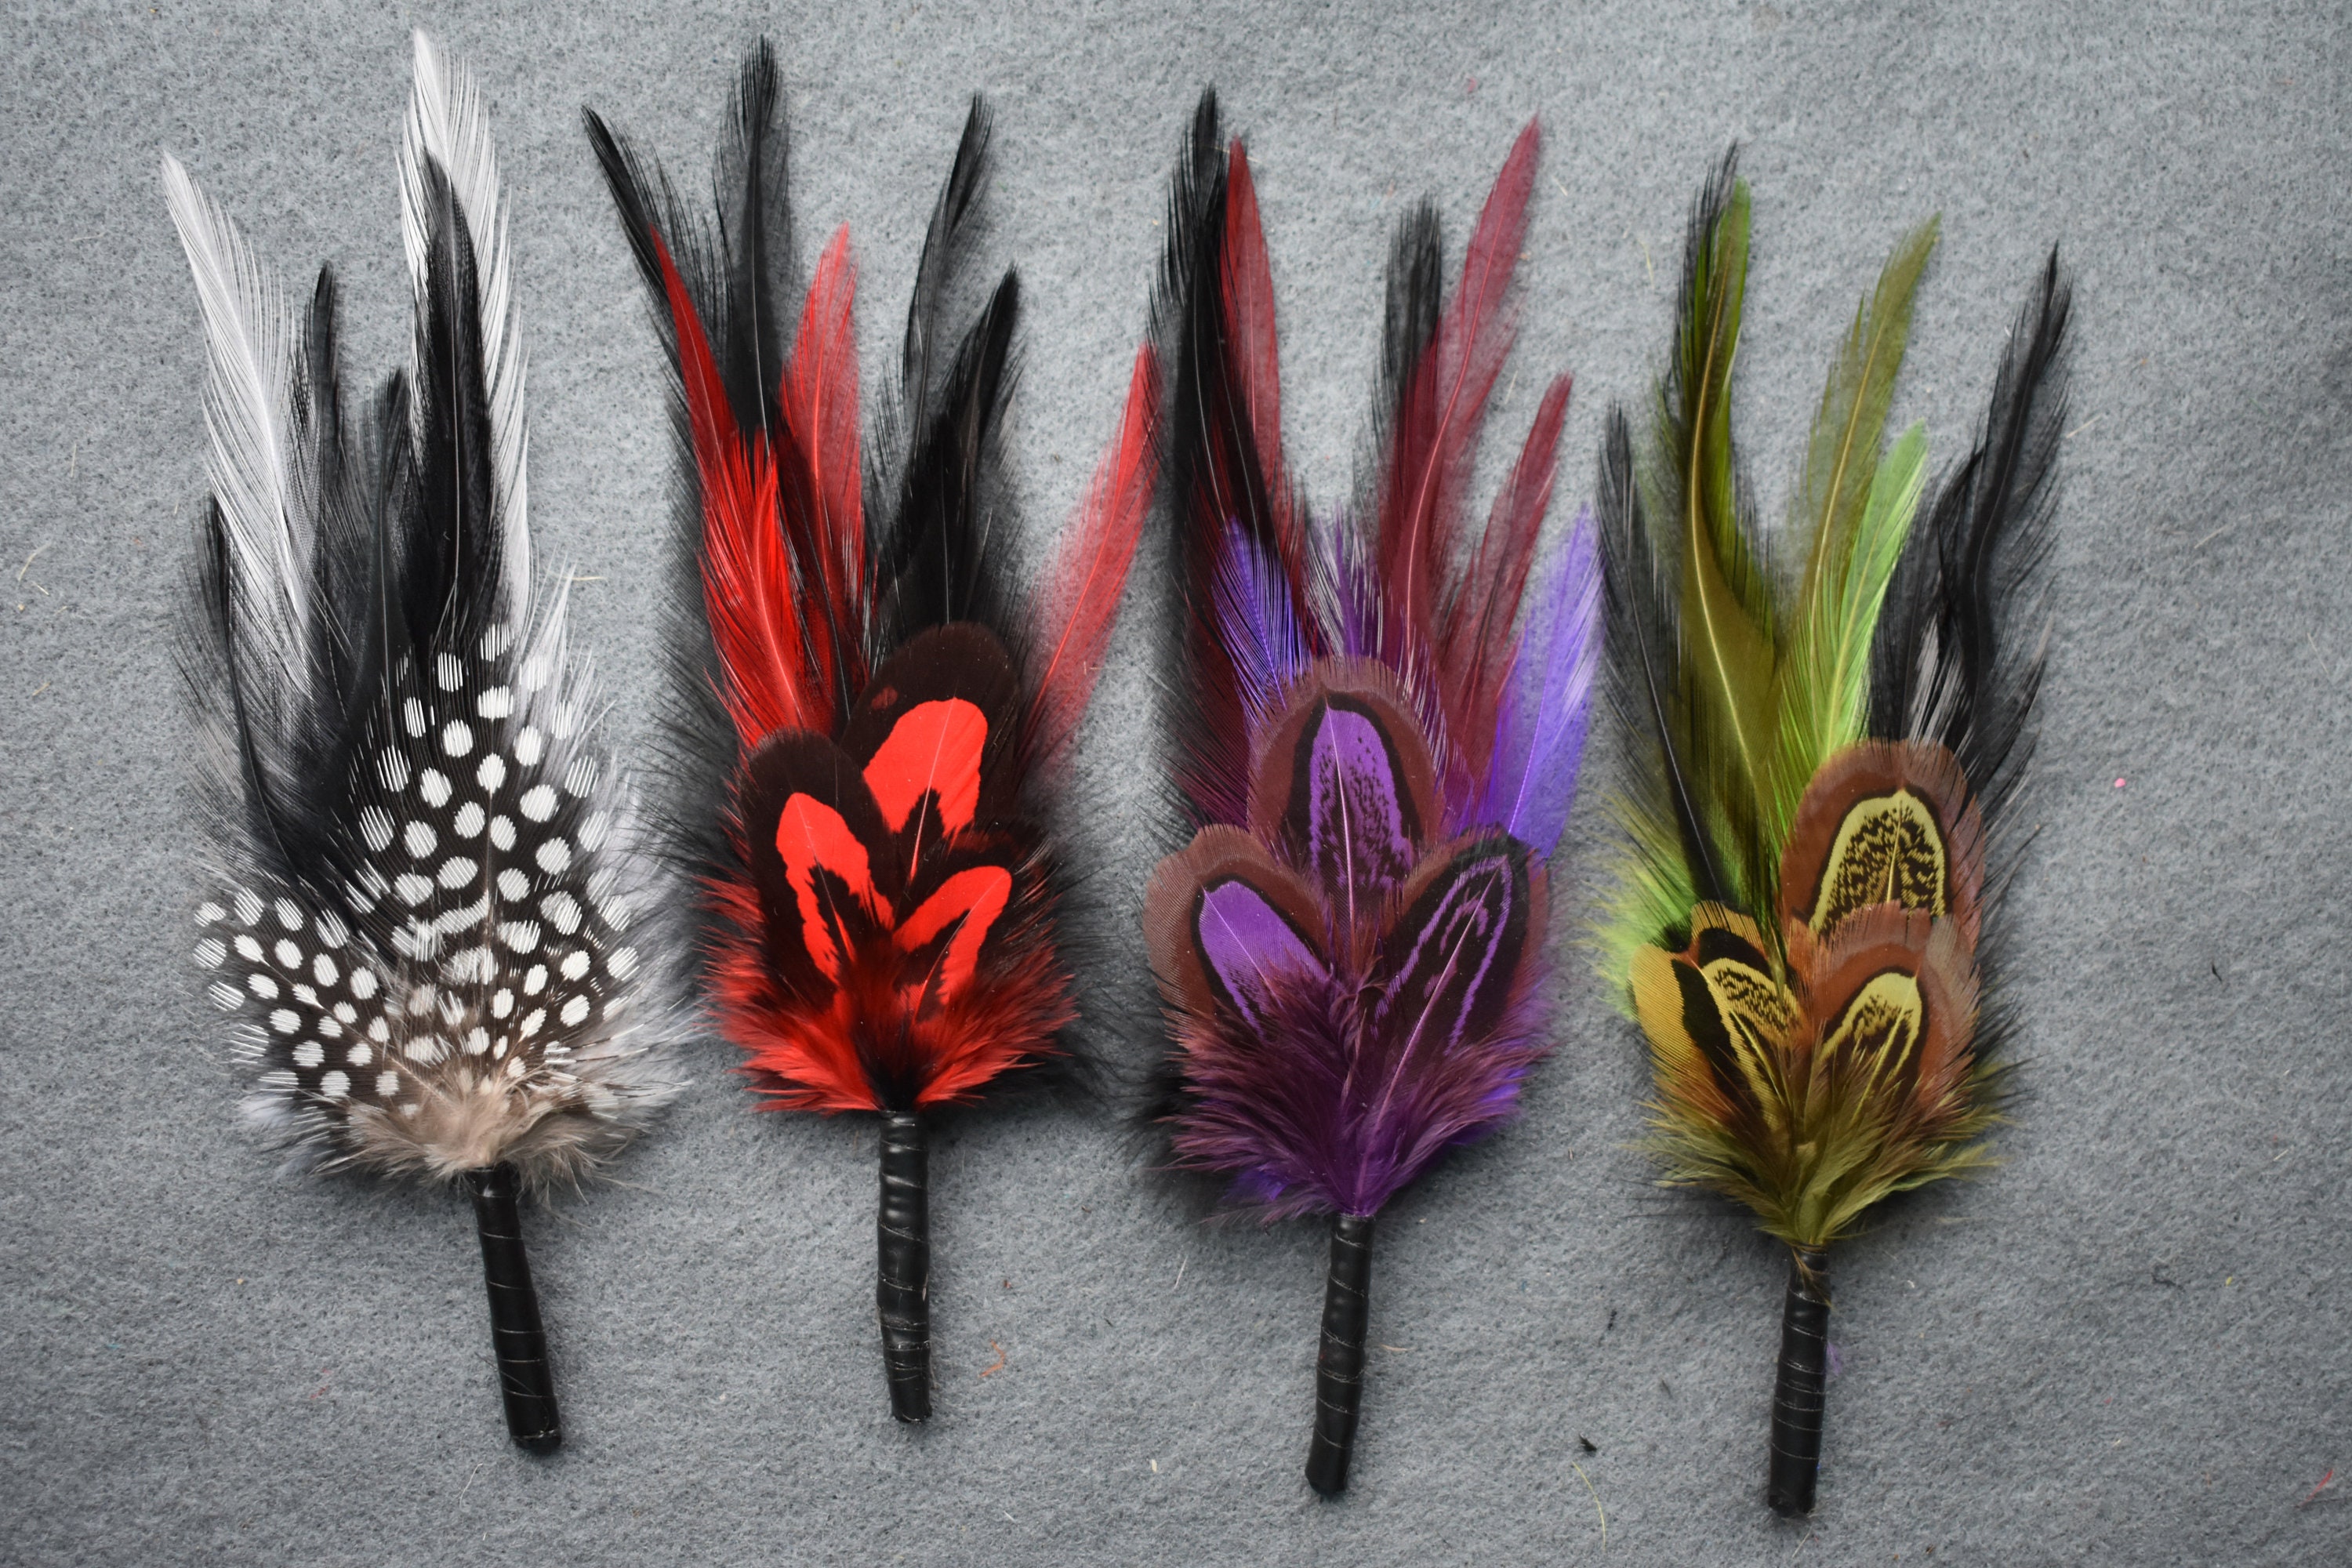 Bulk Feathers Assortment, 600 Brightly colored feathers, Bulk Feathers,  Bridal feathers, Embellishment Hat Feathers, Kids crafts